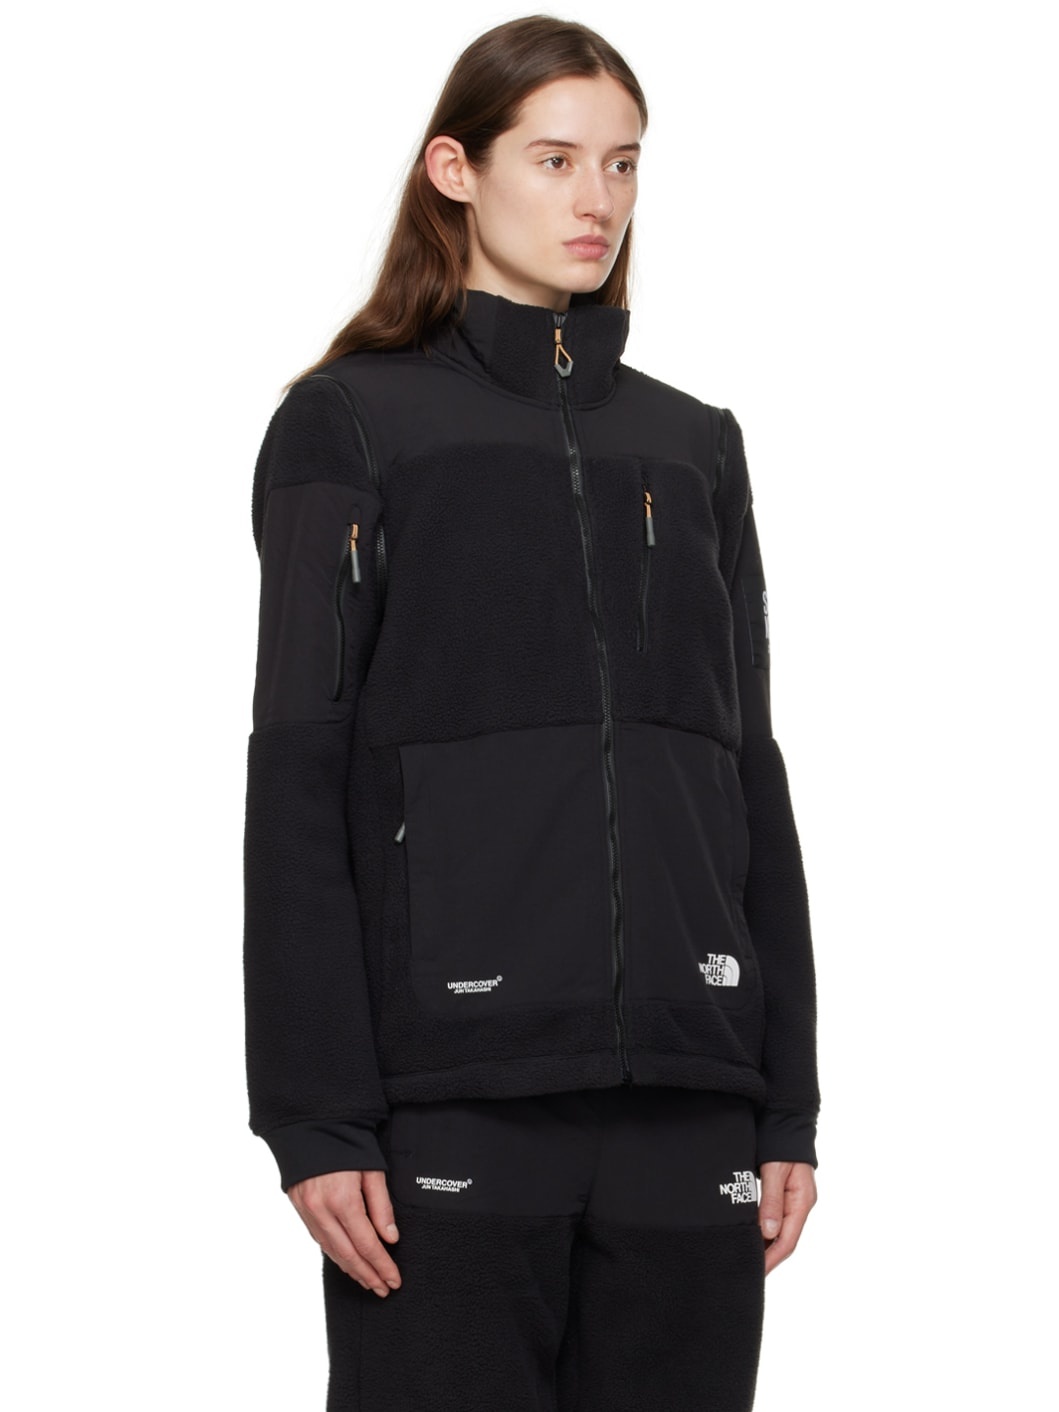 Black The North Face Edition Jacket - 2